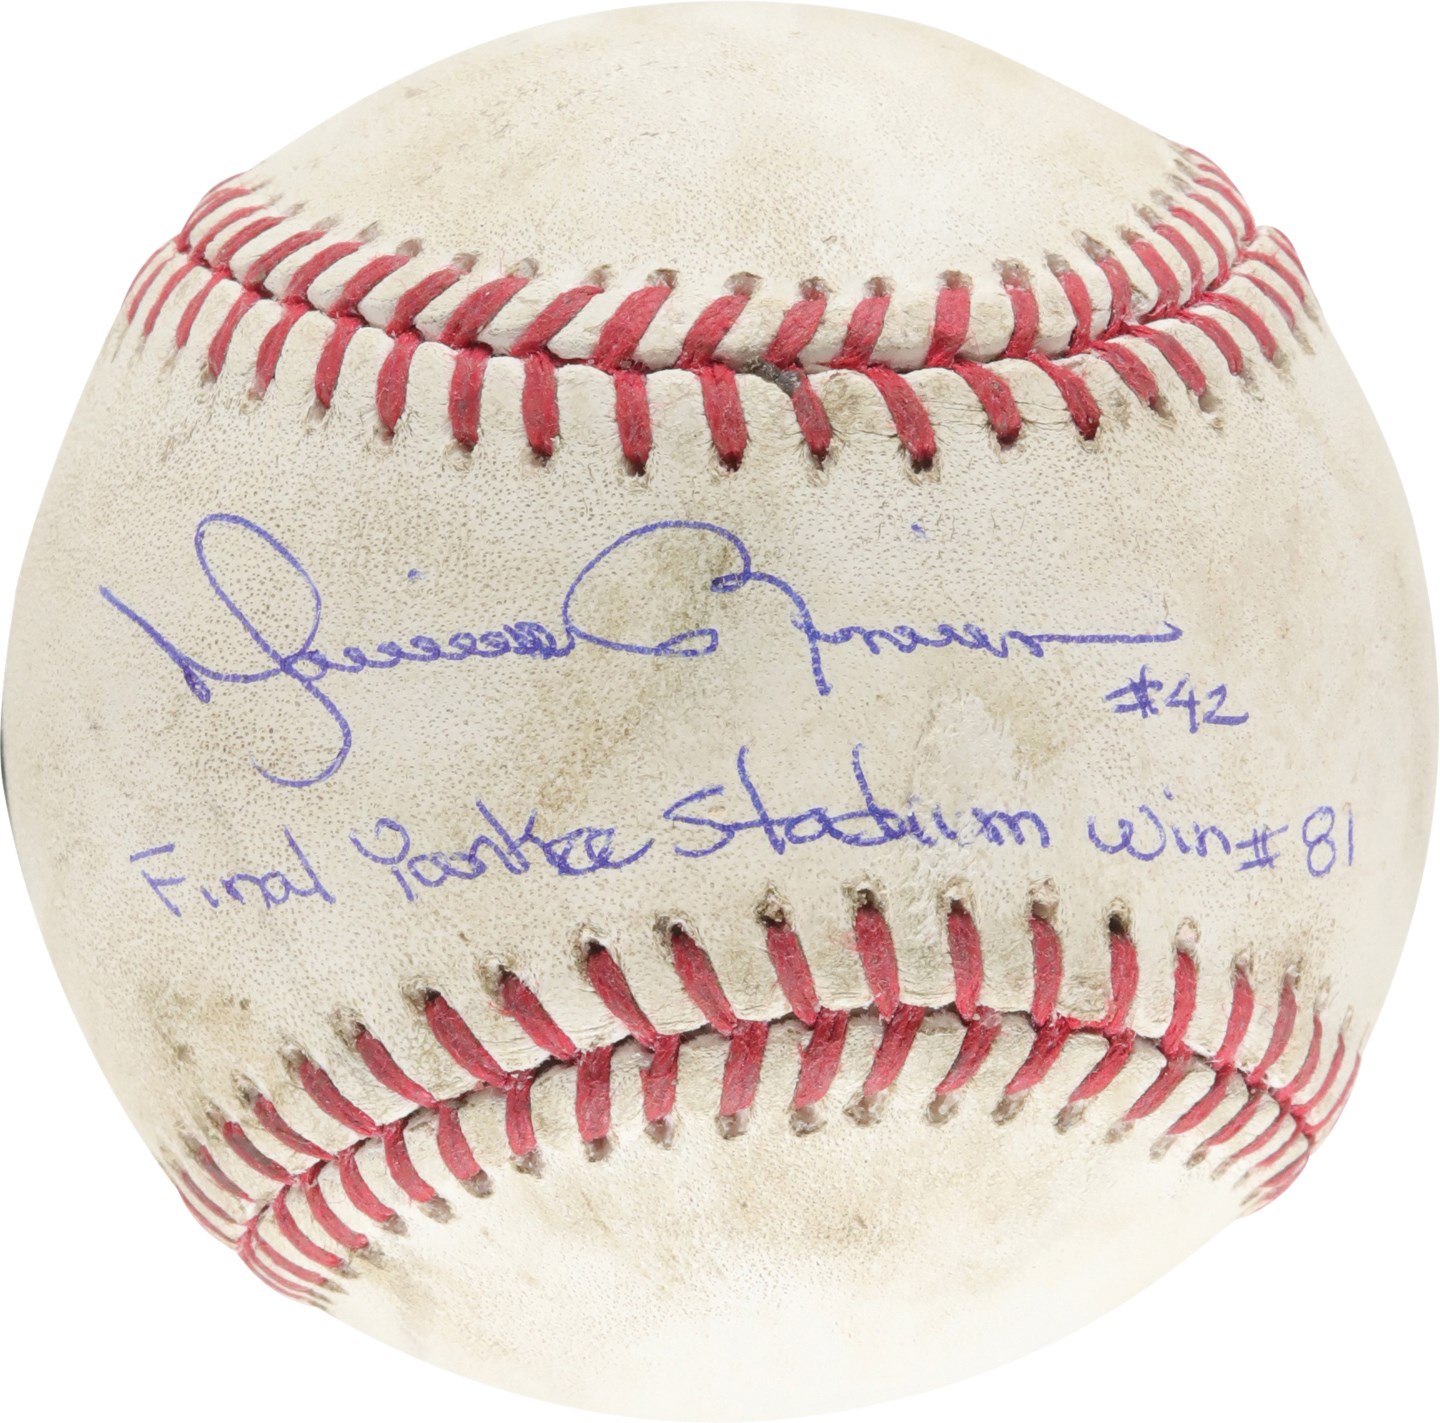 - 9/8/13 Mariano Rivera Signed Inscribed Game Used Baseball from Final Yankee Stadium Win (MLB and PSA GEM MINT 10 Auto)